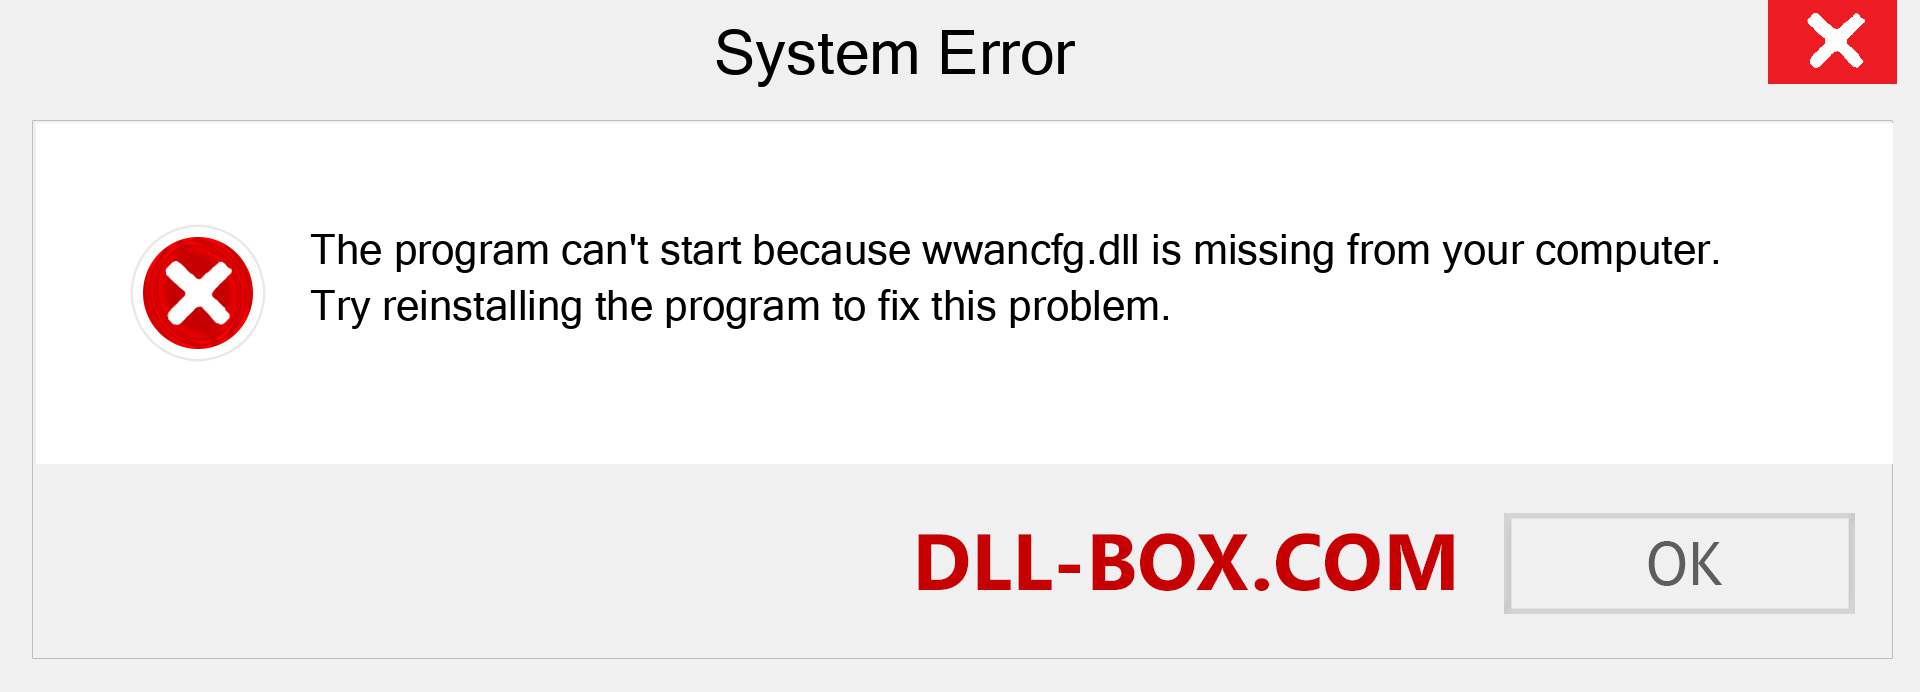  wwancfg.dll file is missing?. Download for Windows 7, 8, 10 - Fix  wwancfg dll Missing Error on Windows, photos, images